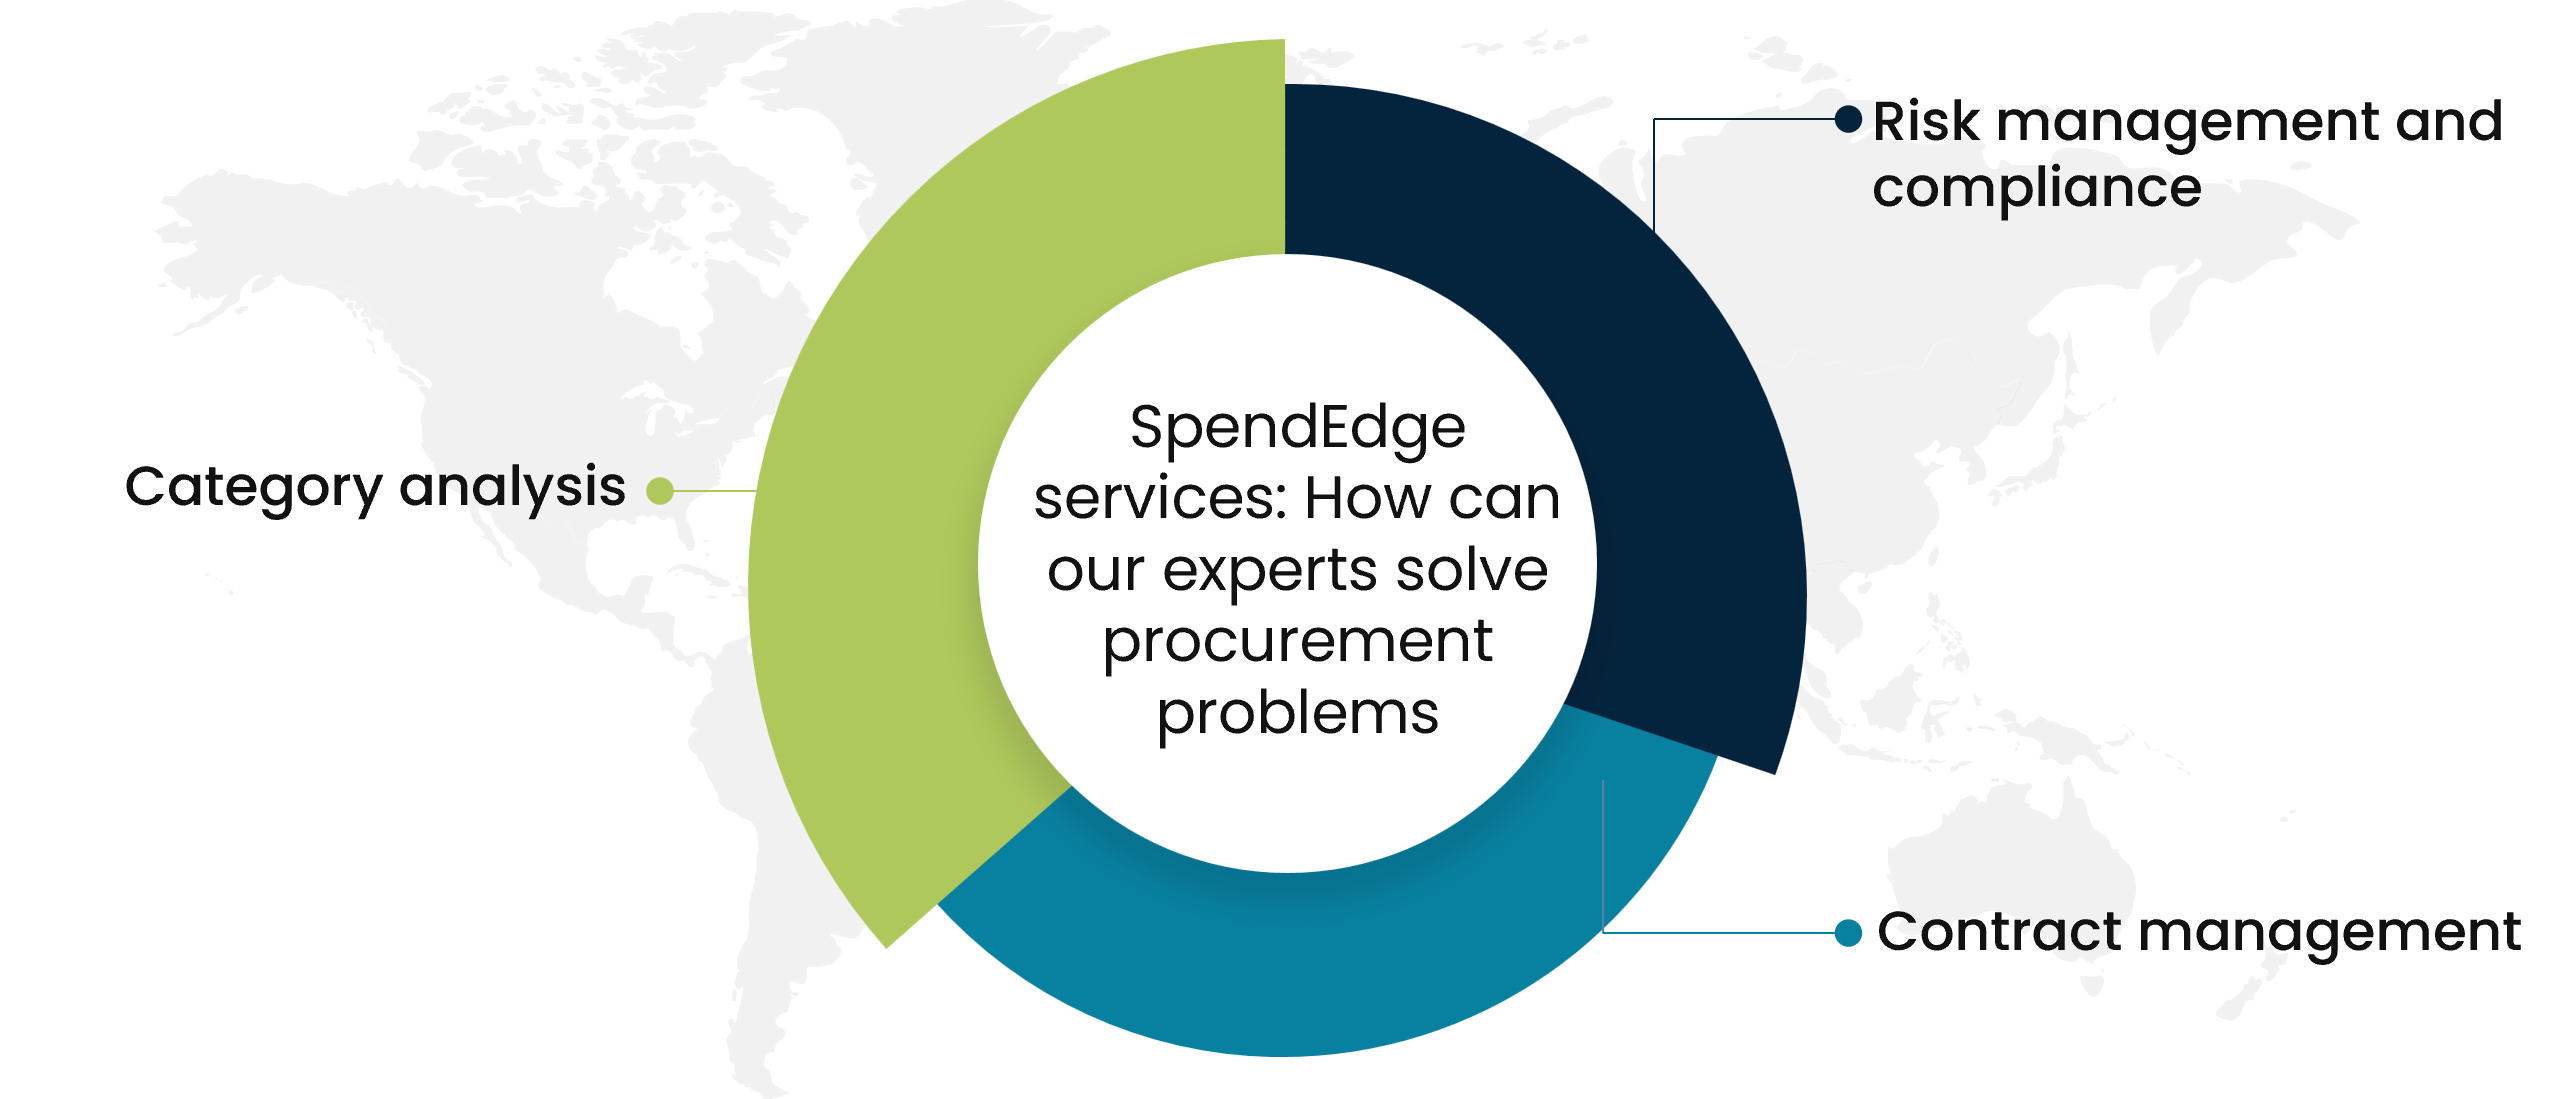 SpendEdge services: How can our experts solve procurement problems.